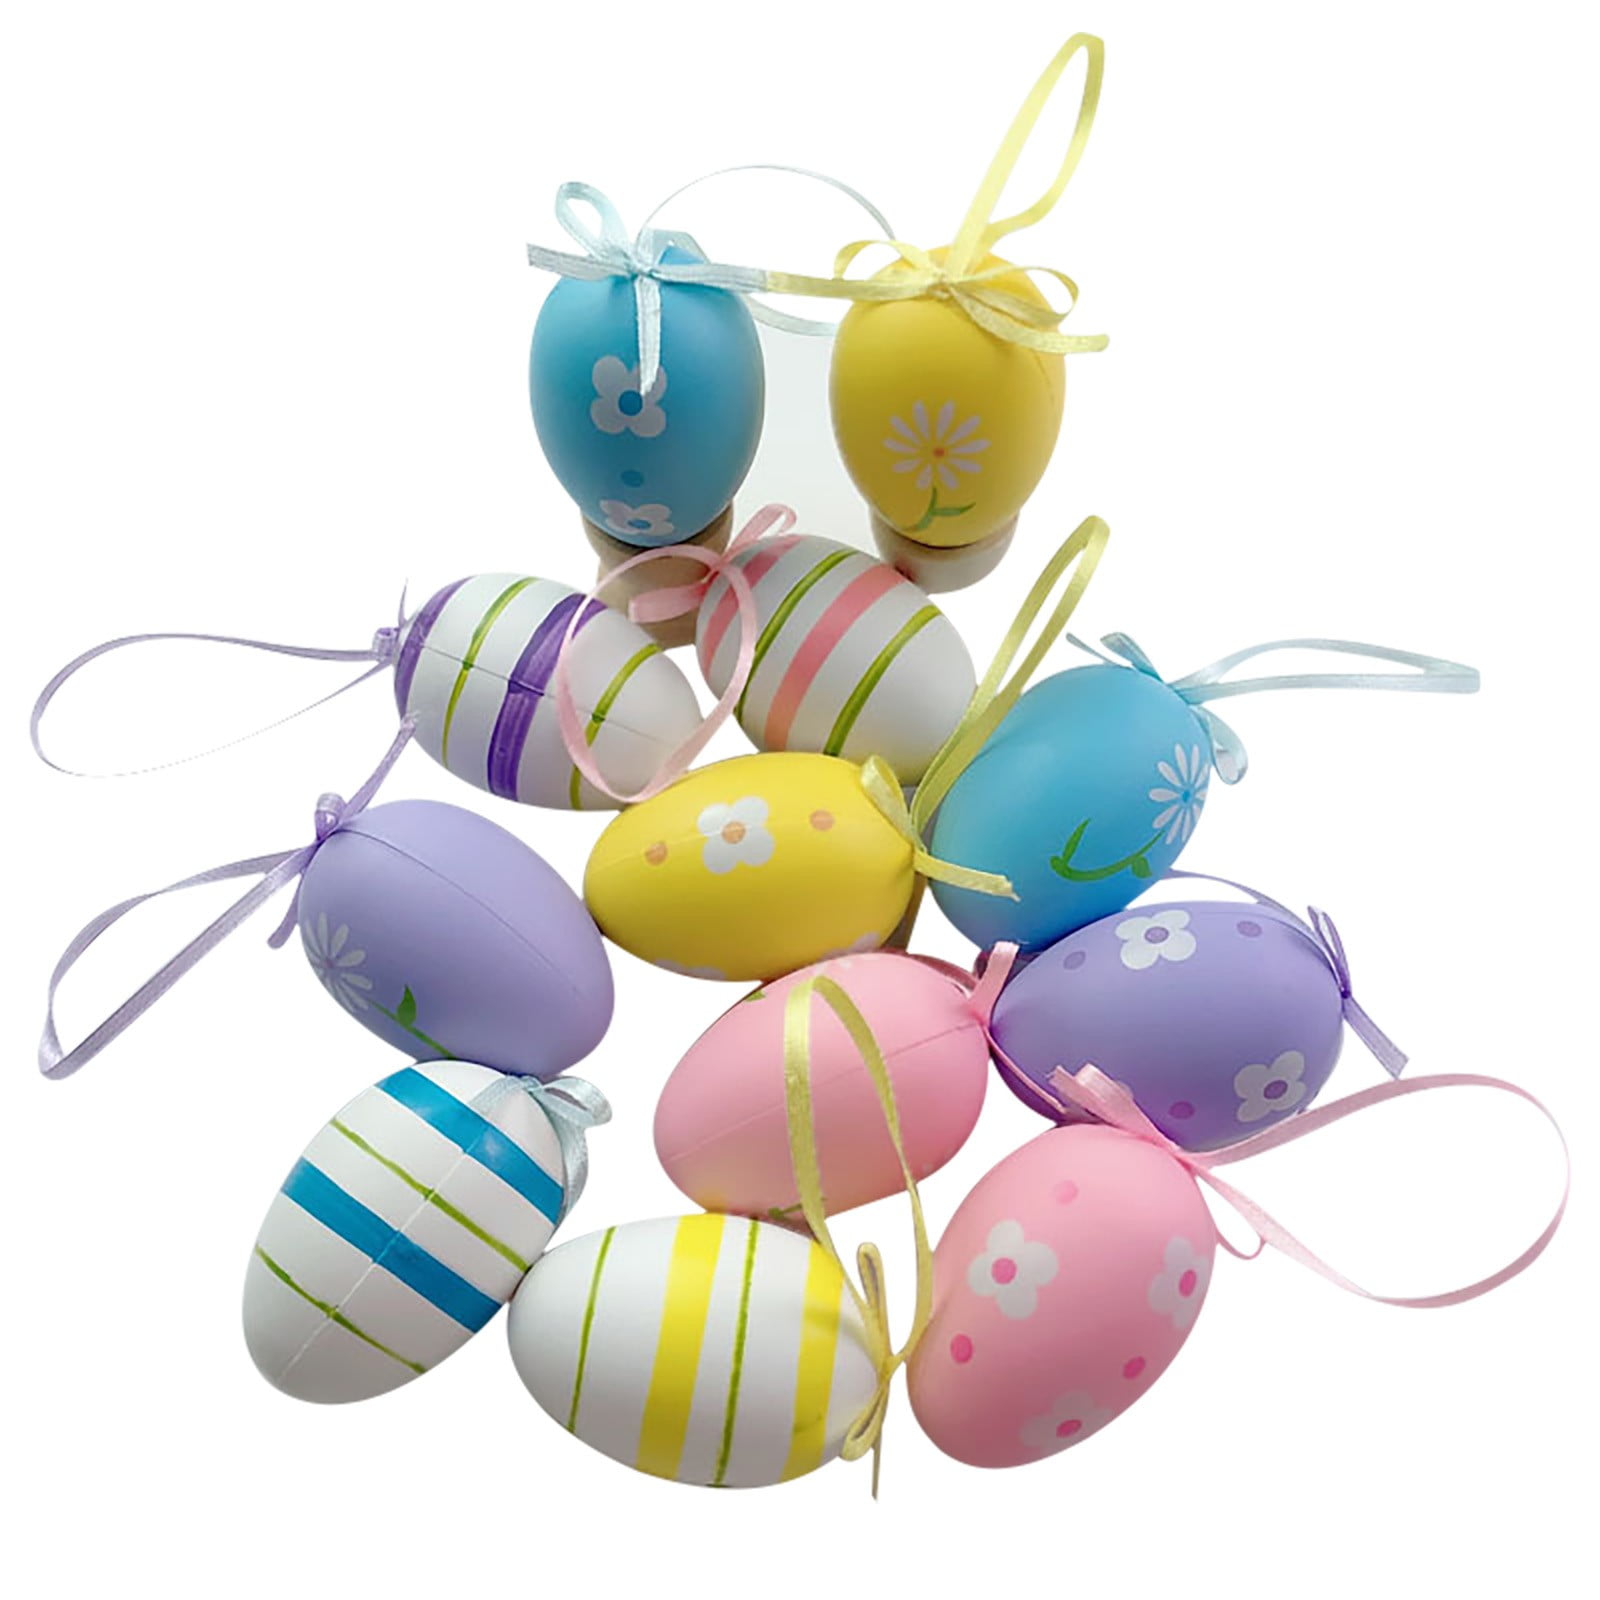 hjkl 12Pcs Easter Decorations Eggs Hanging Ornaments Colorful for Easter Tree Basket Decor Party Favors Supplies Home 